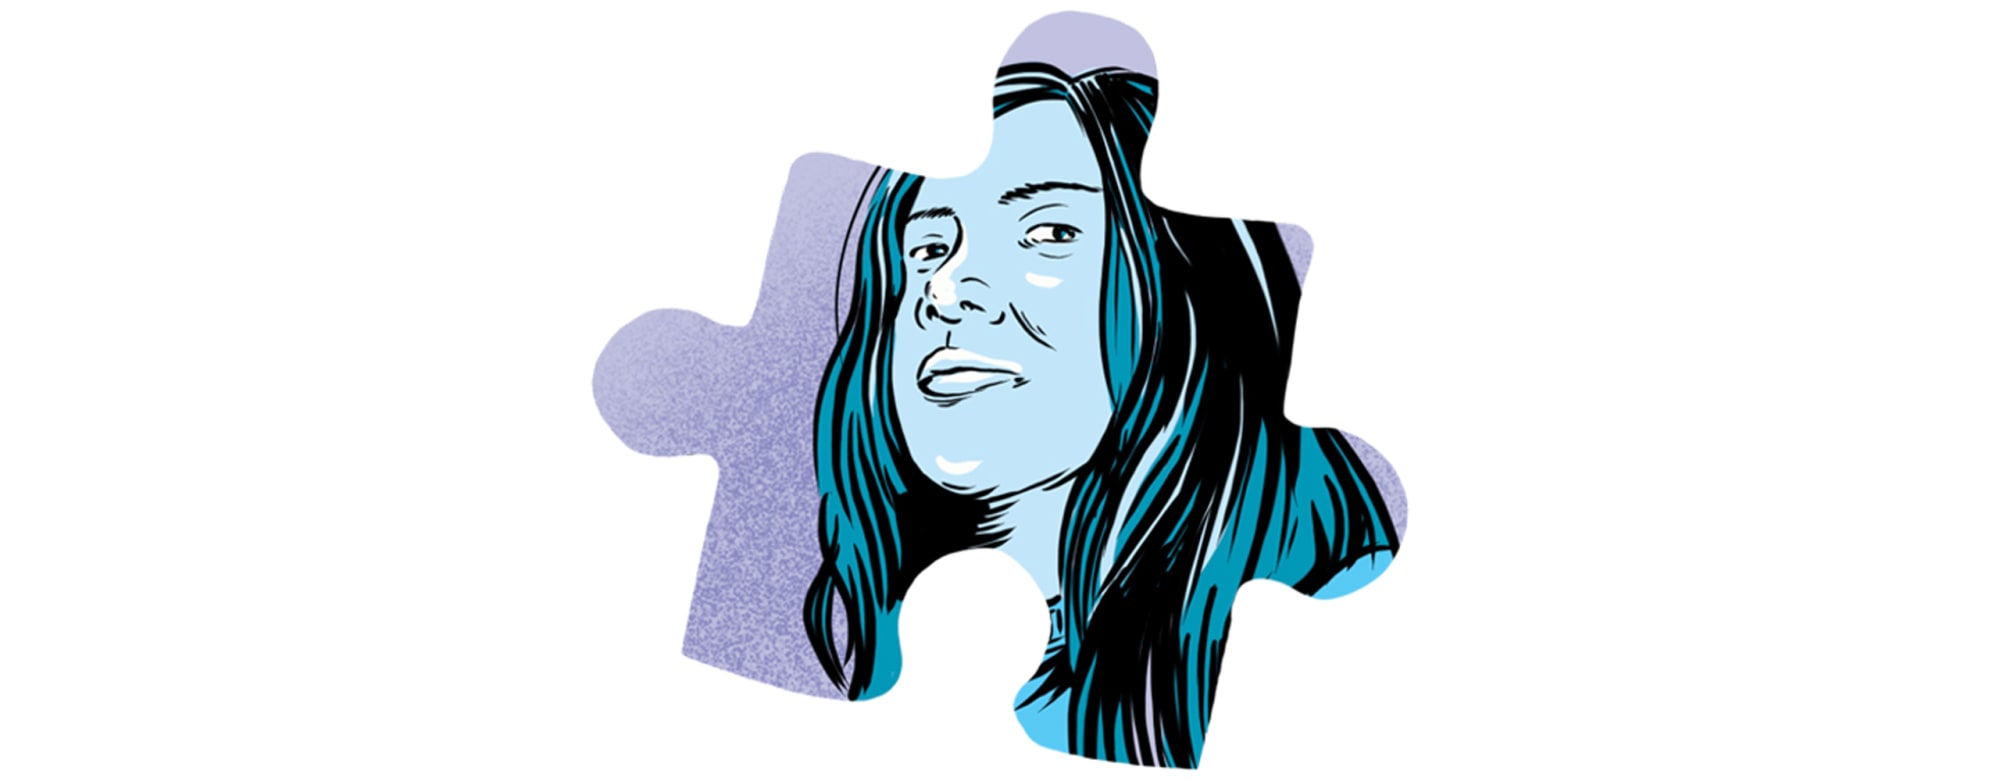 Dark graphic novel style illustration of woman with concerned expression framed in a puzzle piece.